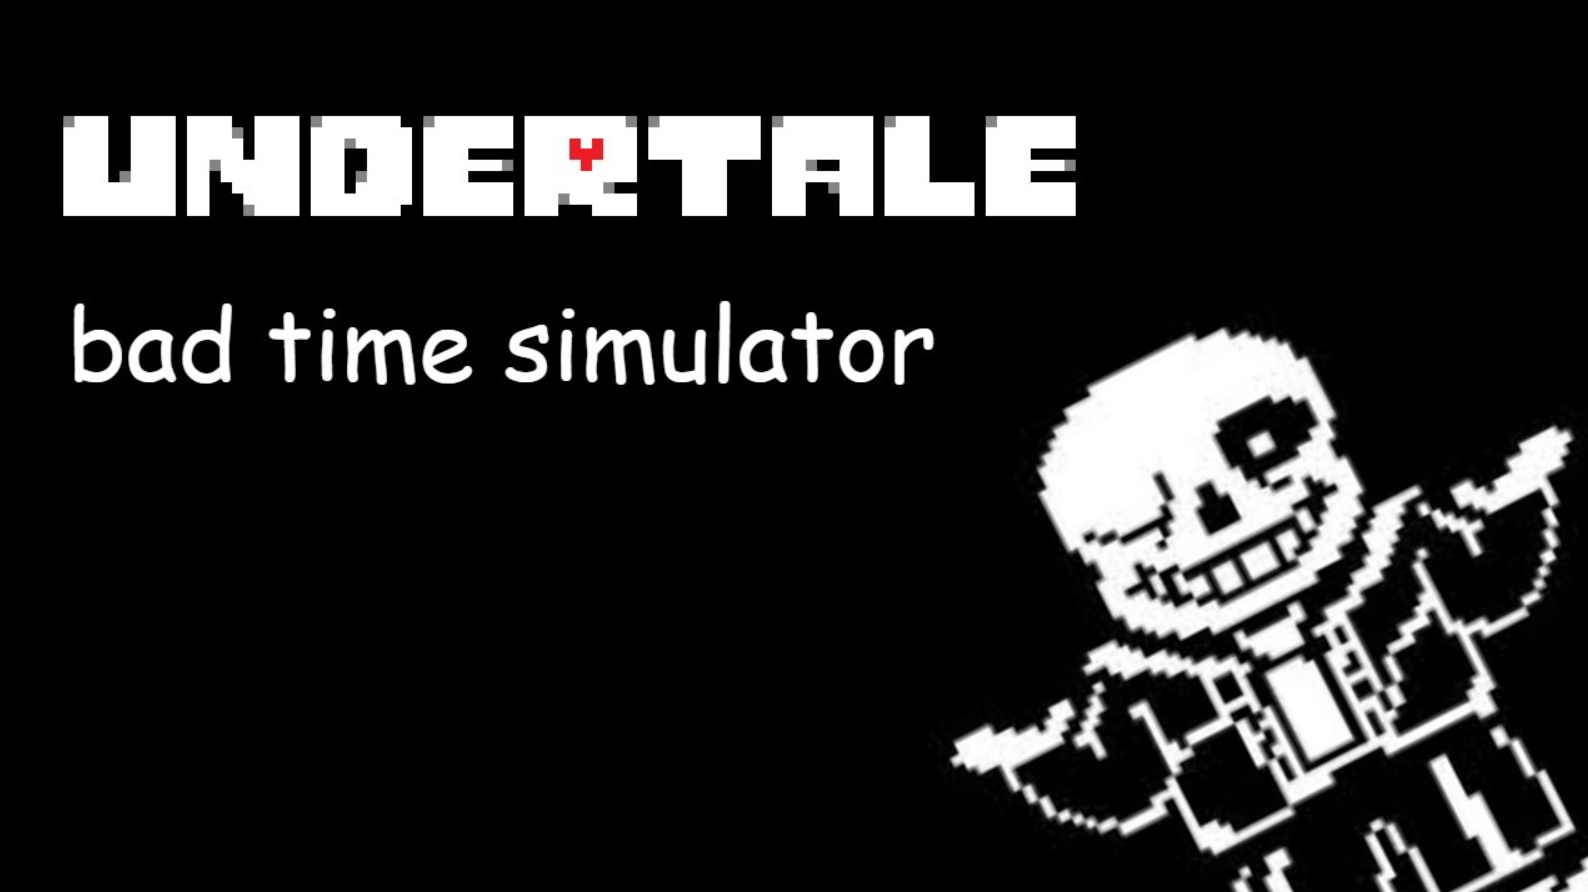 Bad Time Simulator 2.0 Project by Skitter Kayak